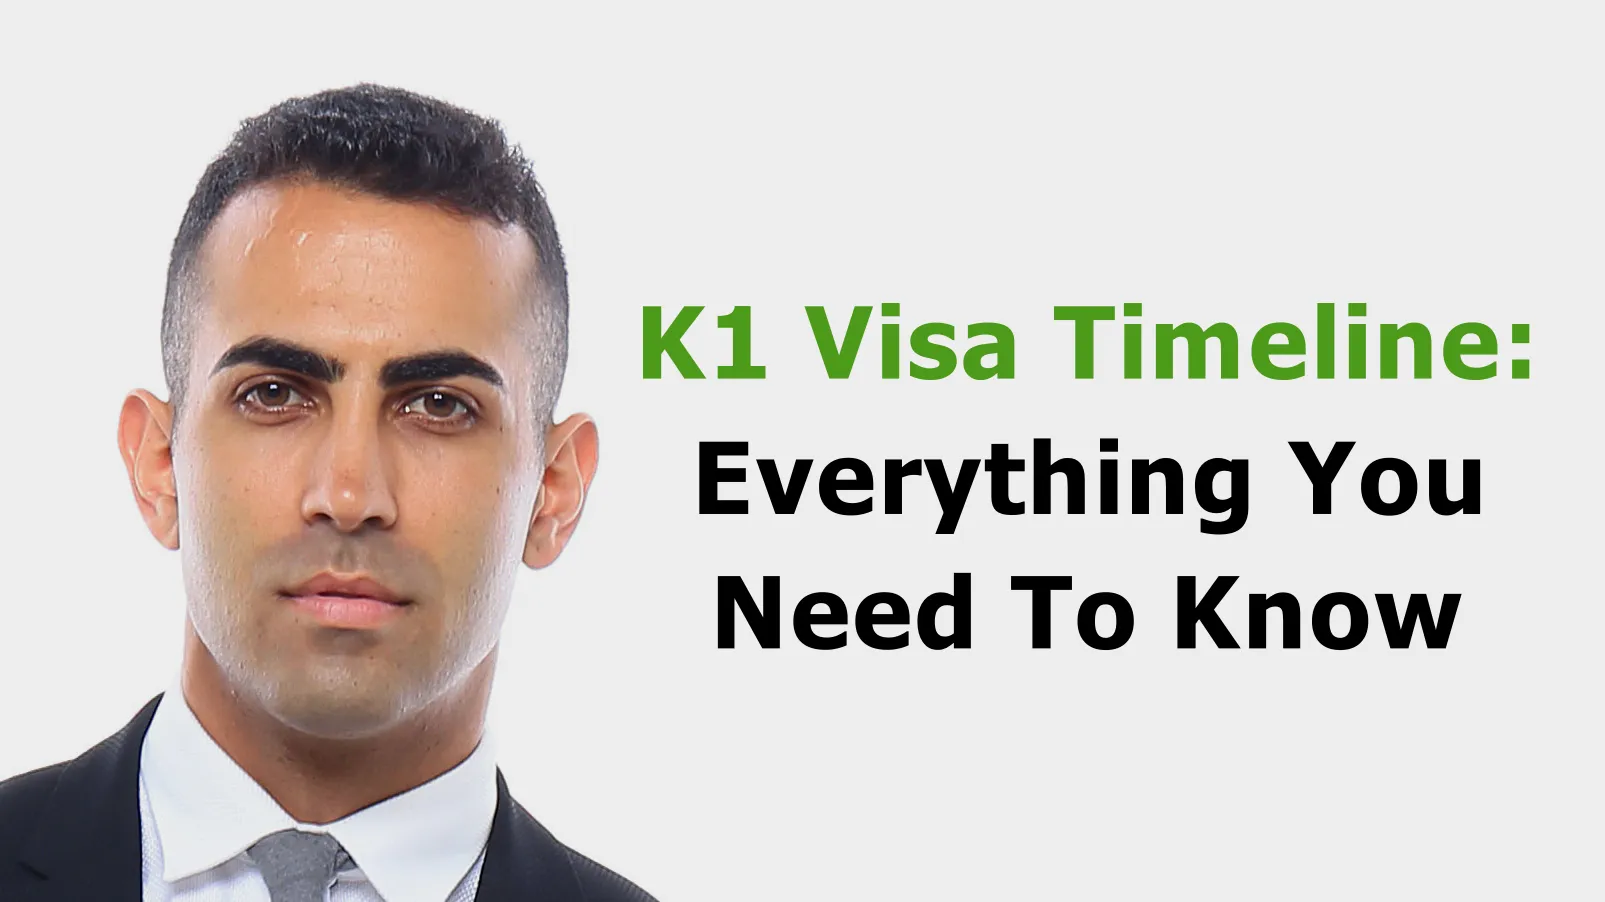 K1 Visa Timeline-Everything You Need To Know